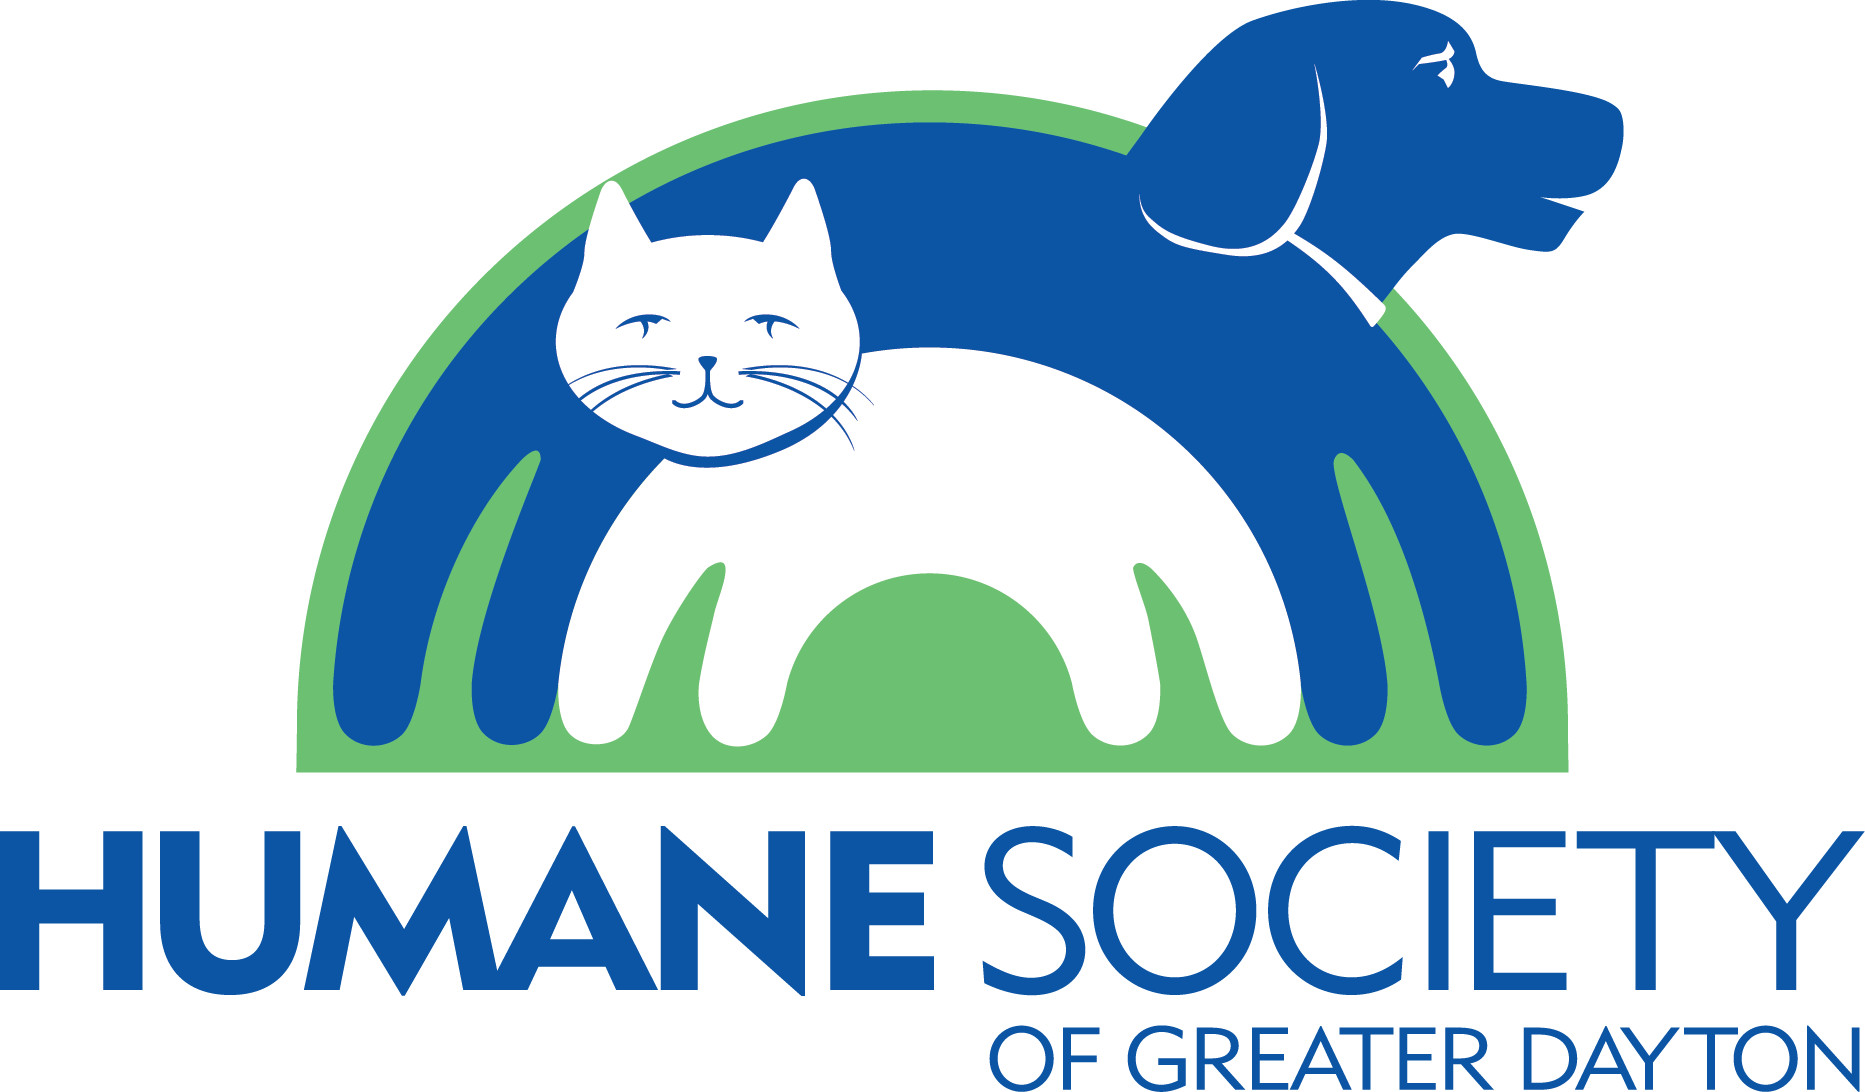 Get to know Humane Society of Greater Dayton.